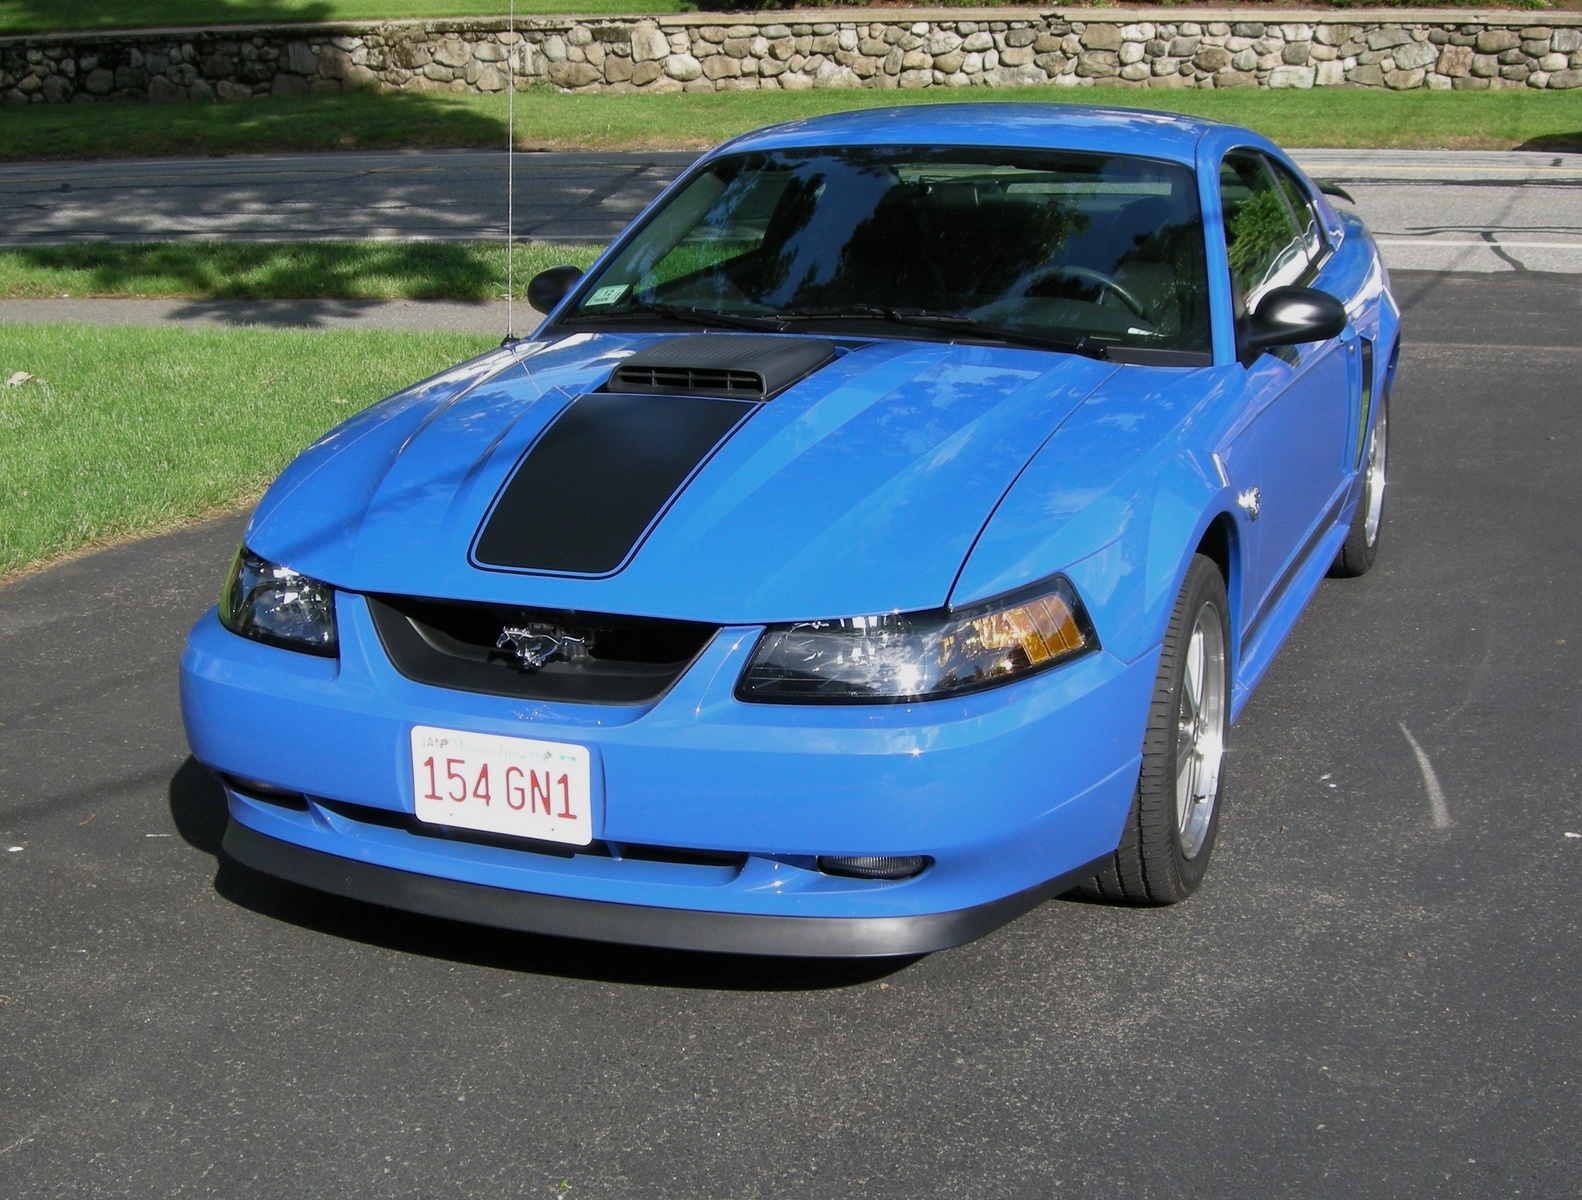 2000 Ford mustang mach 1 specs #5